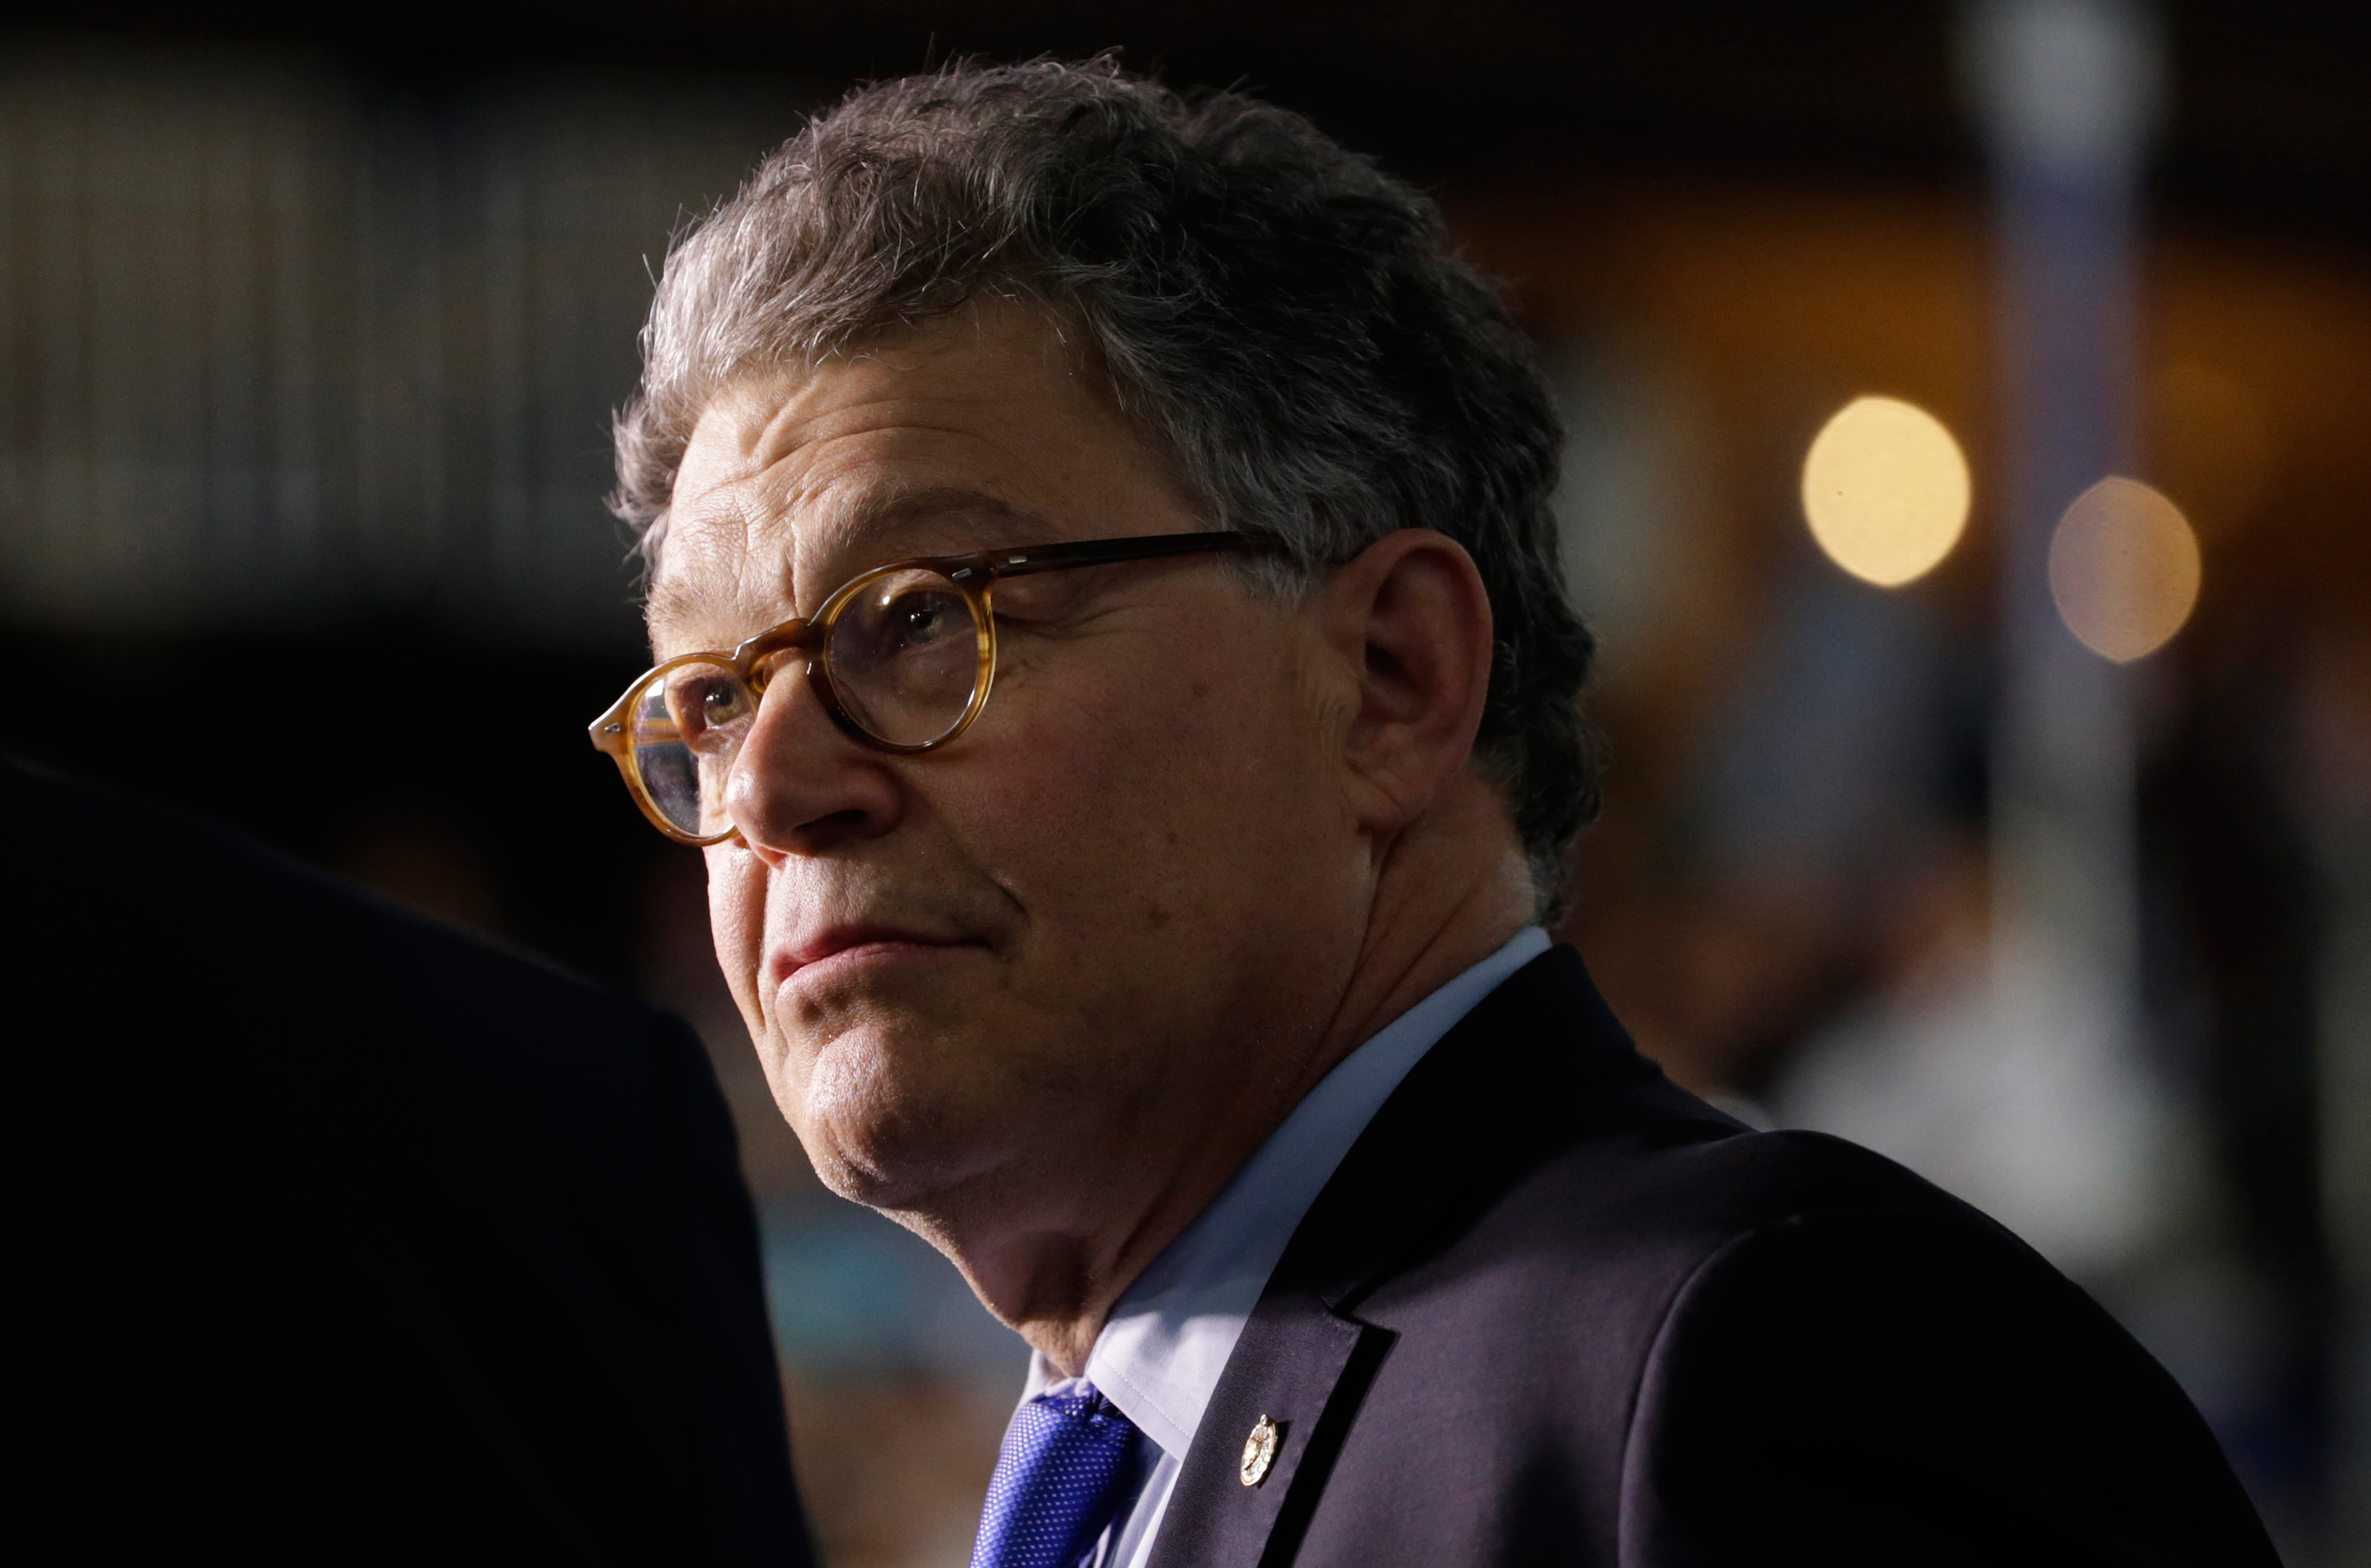 Senator Al Franken is seen at the Democratic National Convention in Philadelphia on July 27, 2016. (Gary Cameron—Reuters)